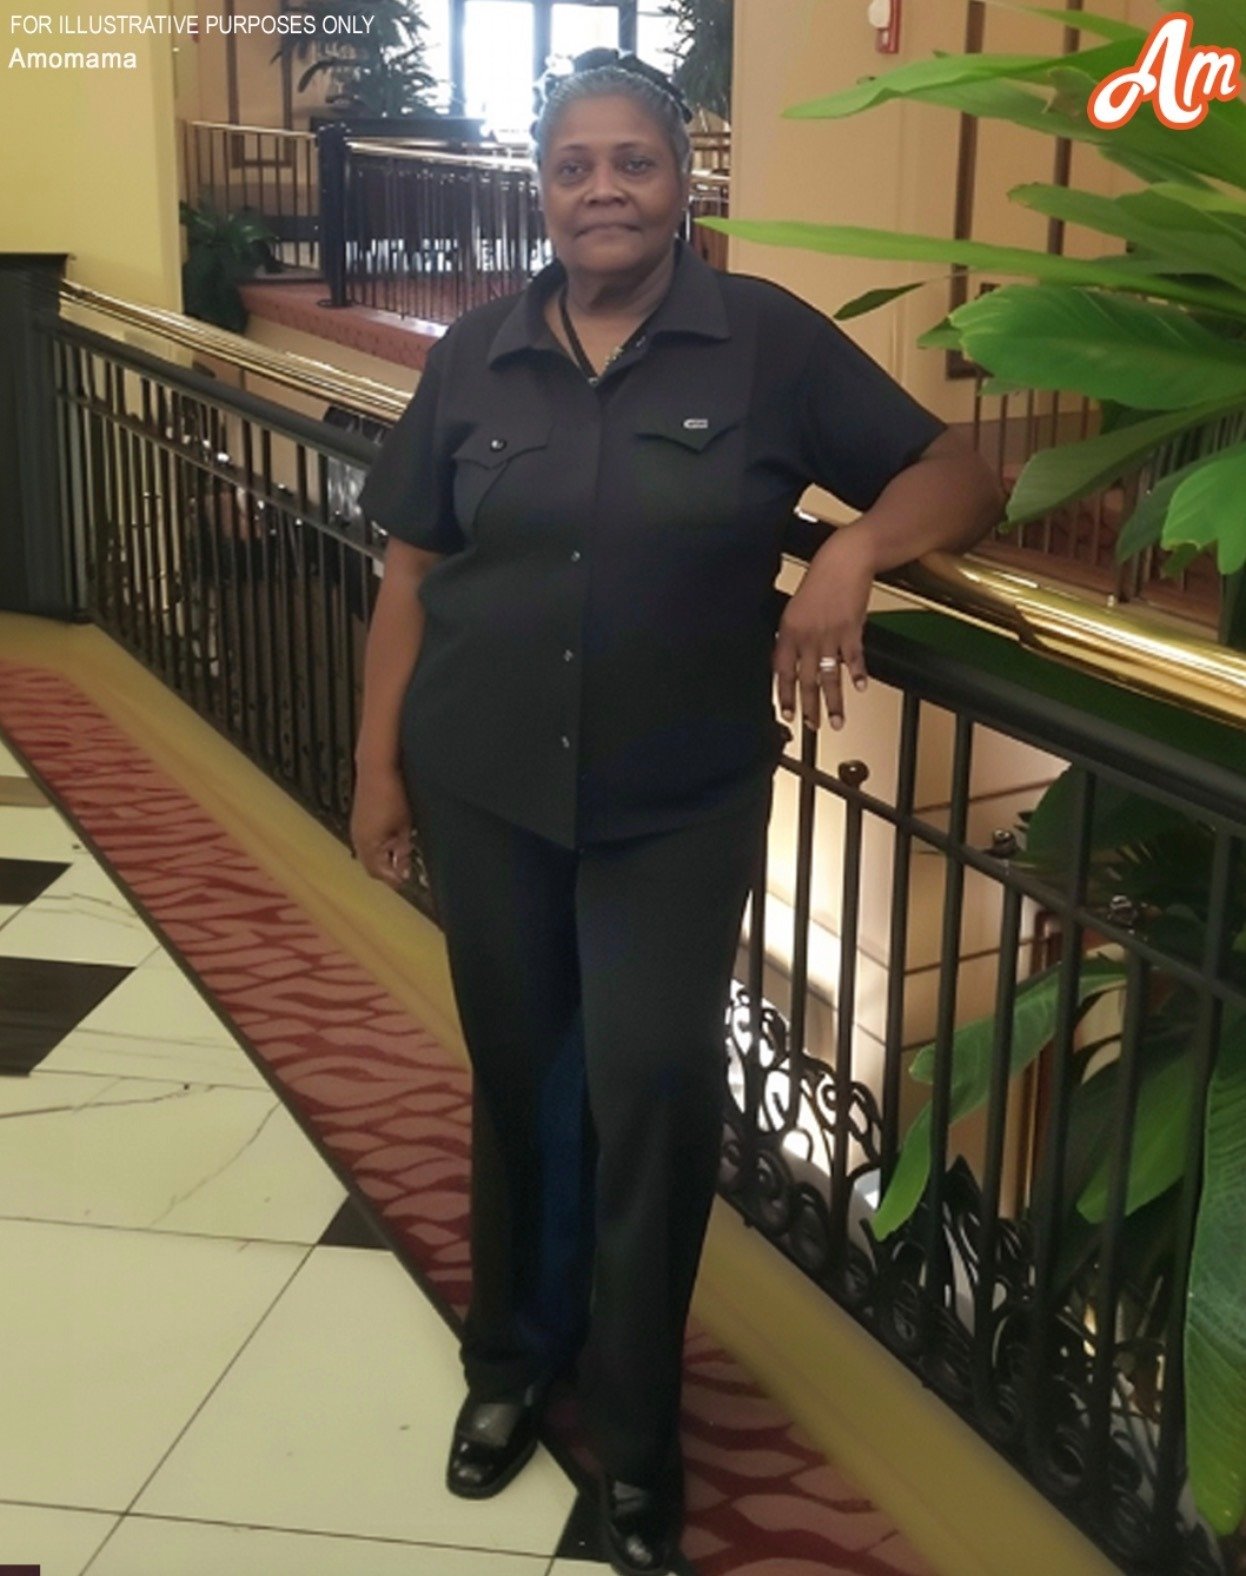 Entitled Hotel Guest Ridiculed My Mother Who Works as a Housekeeper, so She Taught Her to Never Underestimate Housekeeping Again